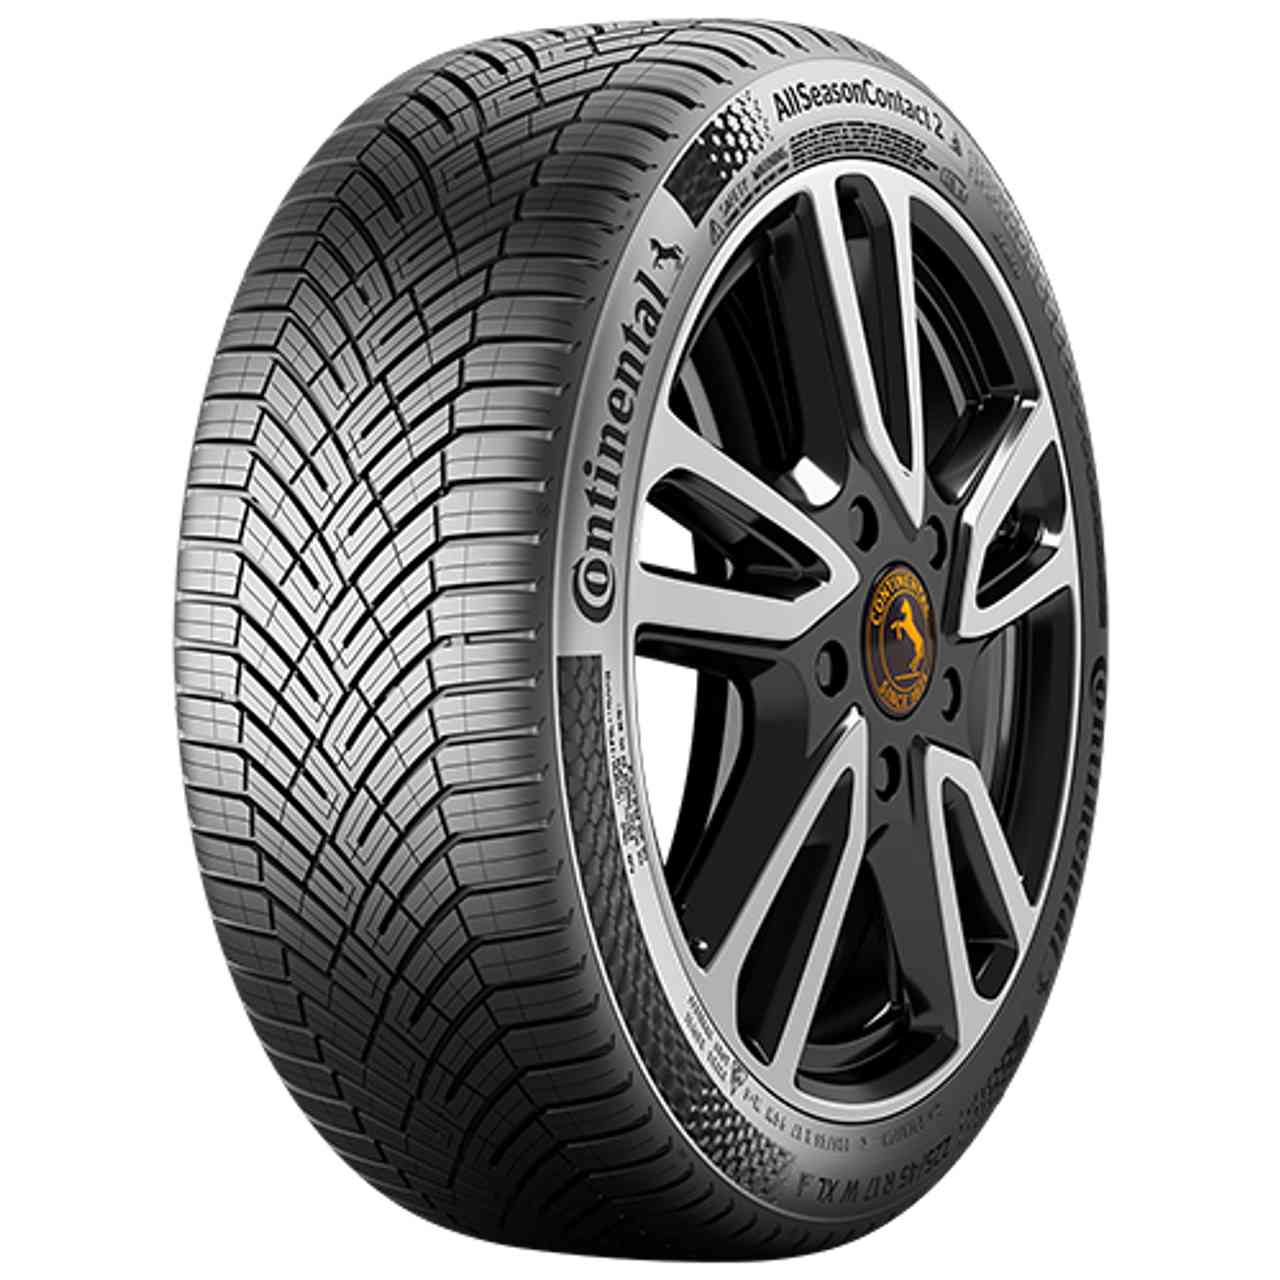 CONTINENTAL ALLSEASONCONTACT 2 (EVc) 185/60R15 88V BSW XL